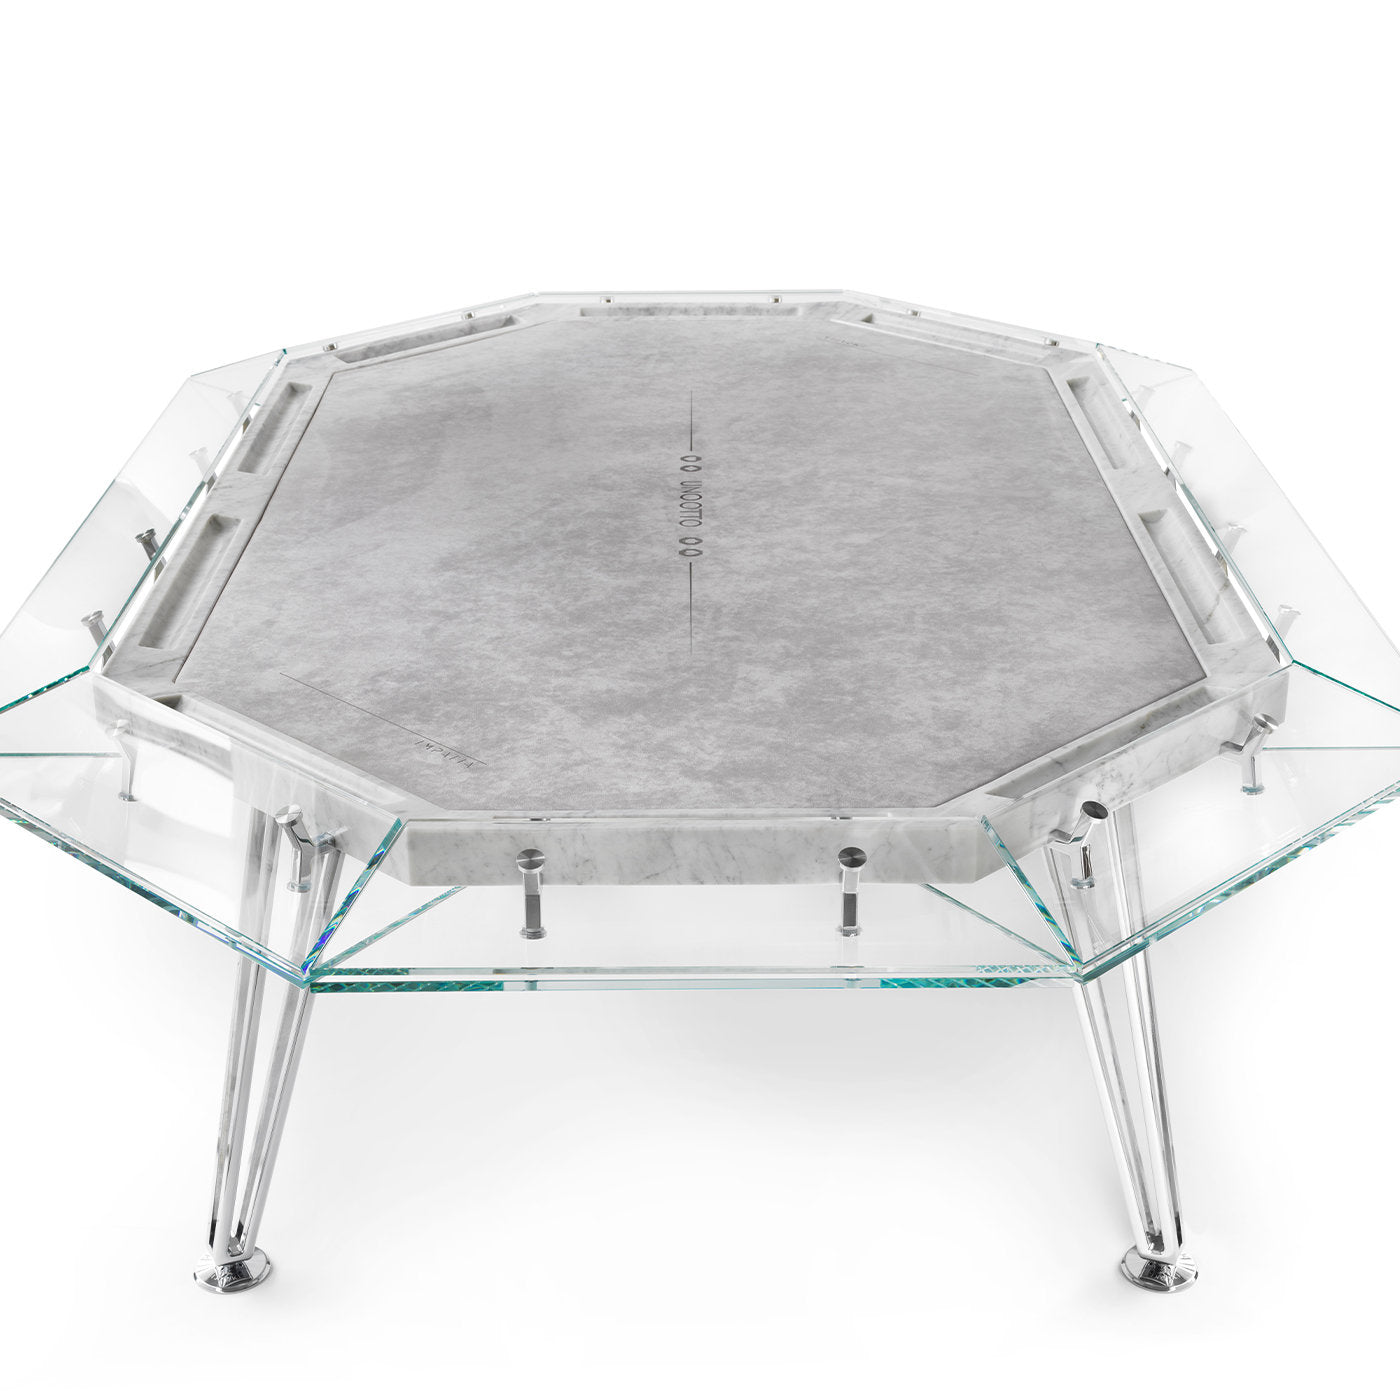 Unootto Marble Edition Ten-Player Poker Table - Alternative view 1